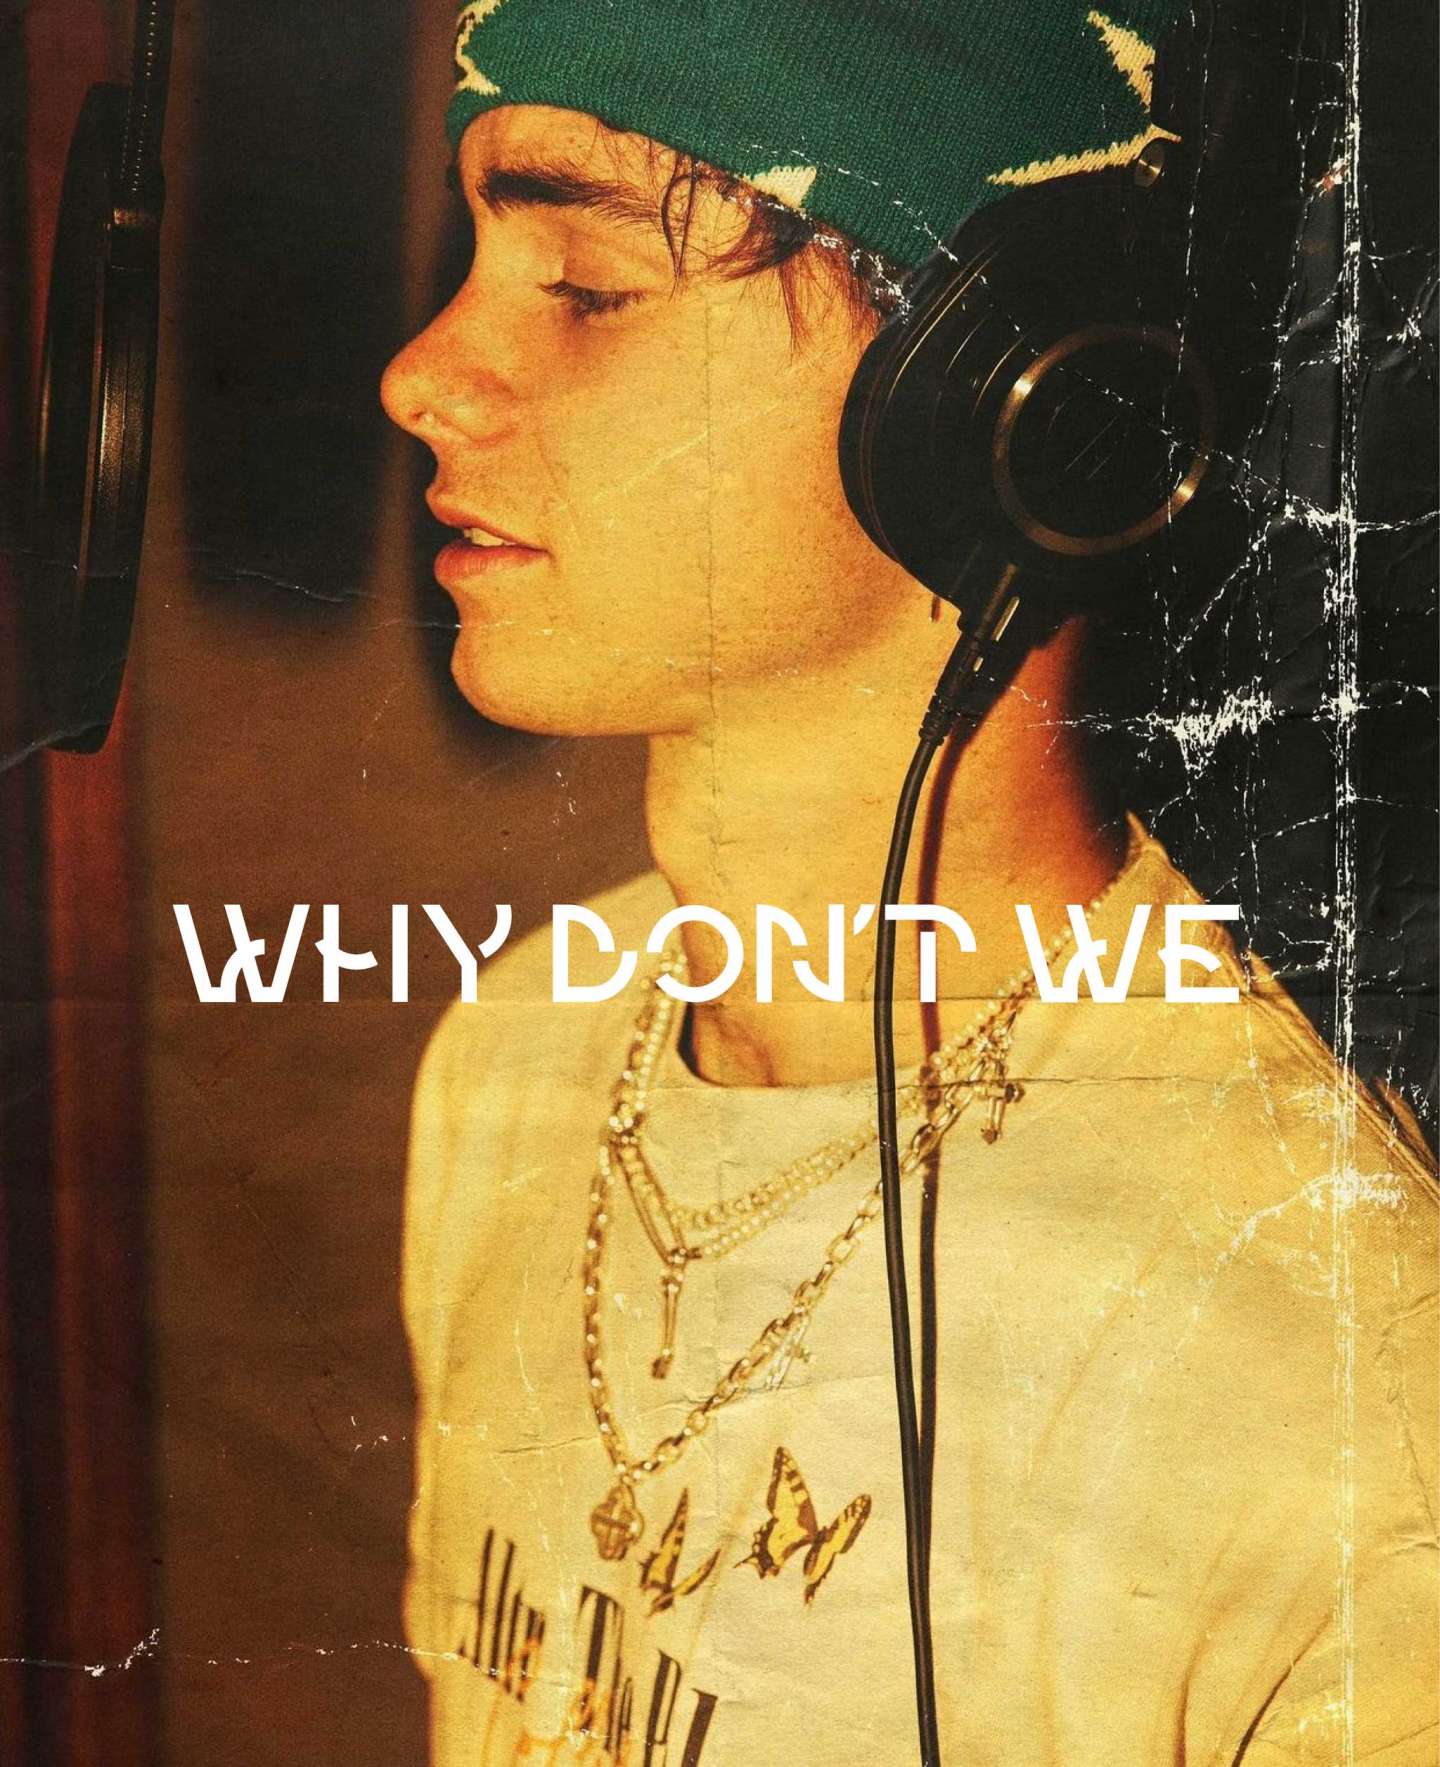 Why Don't We